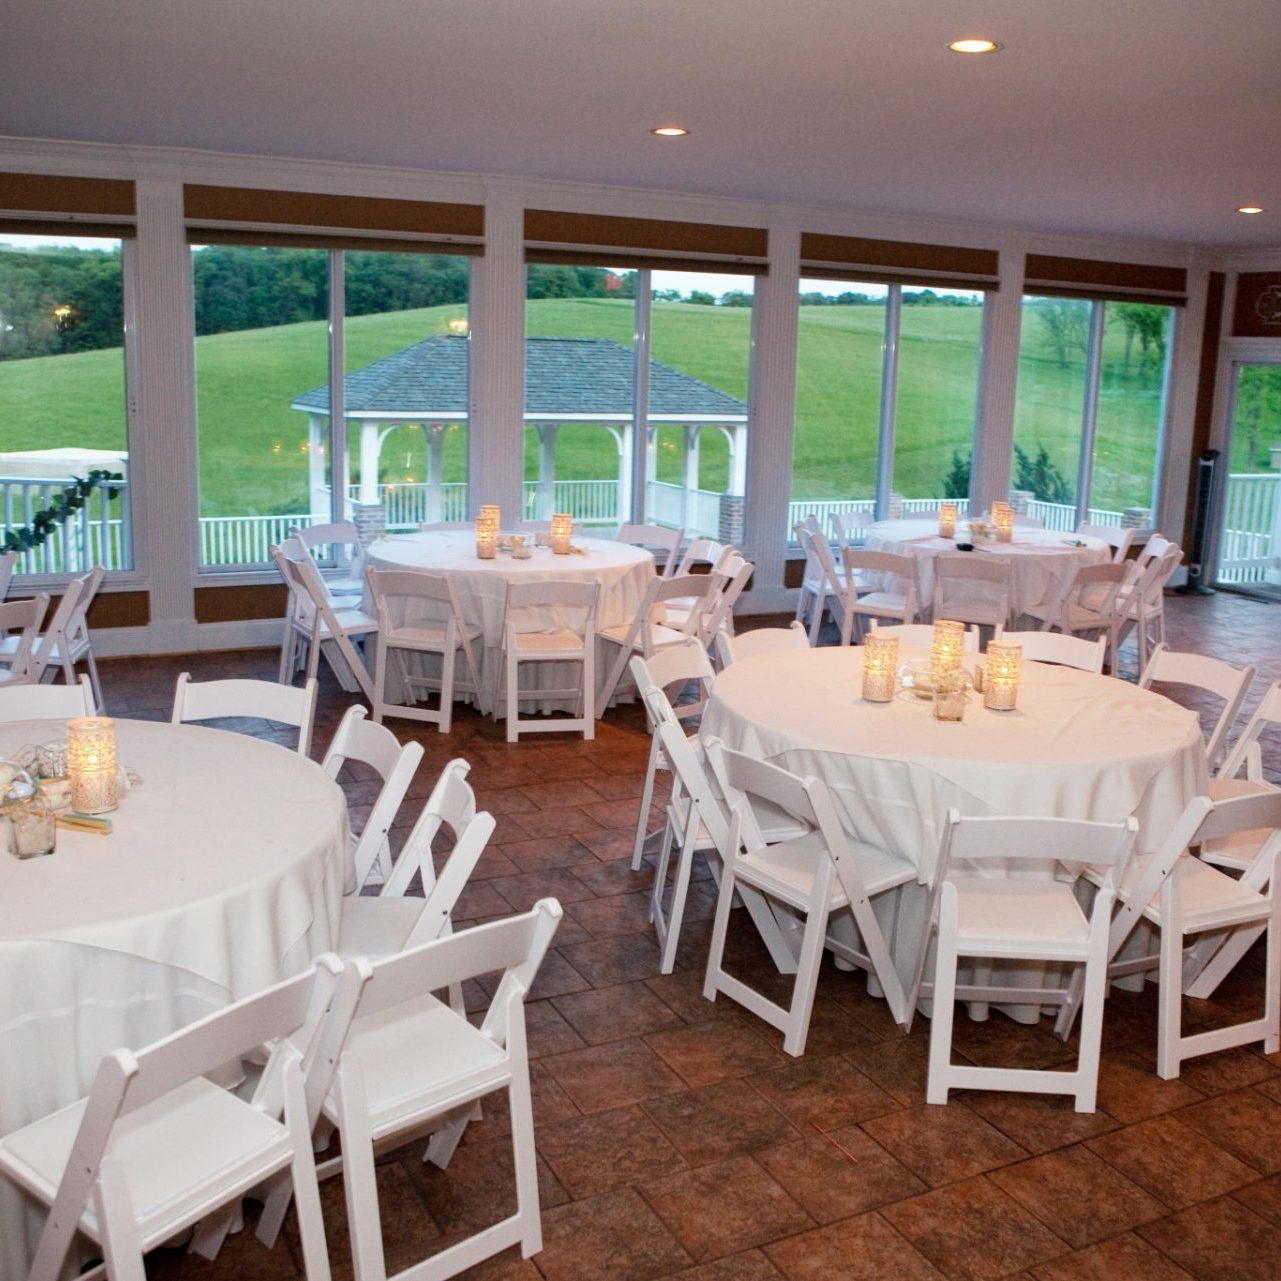 Reception venue in Maryland with plenty of natural light and seating for 200 guests